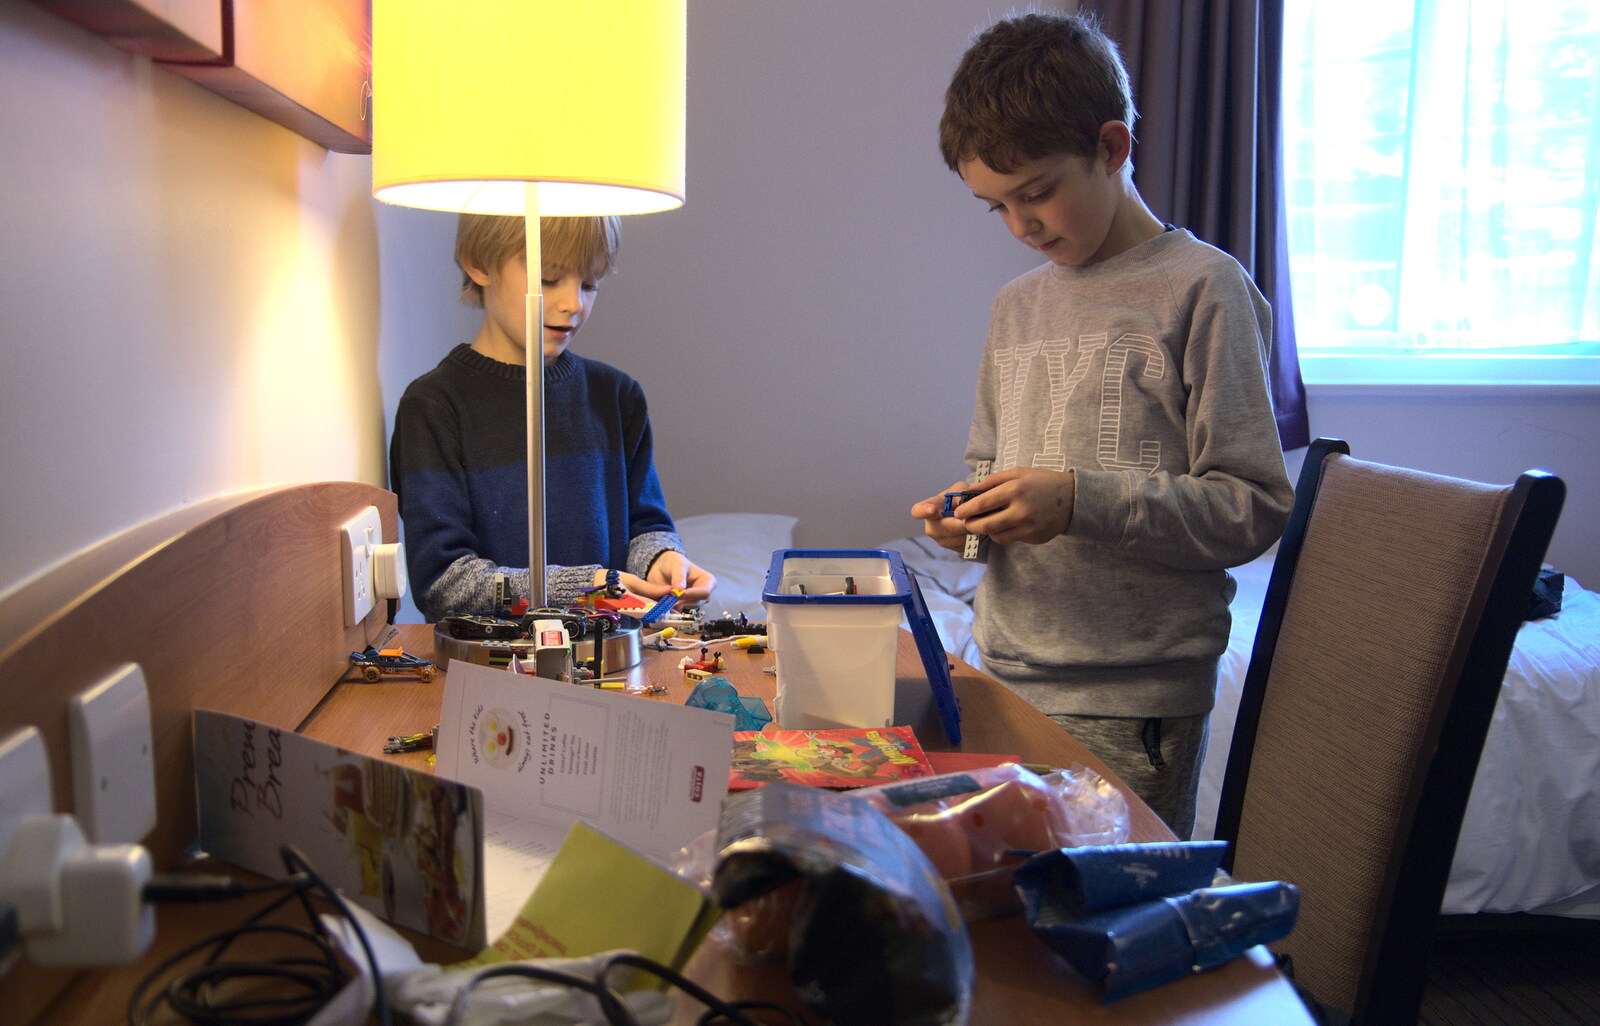 The boys do some Lego in the hotel room from Thanksgiving in Highcliffe, Dorset - 23rd November 2018